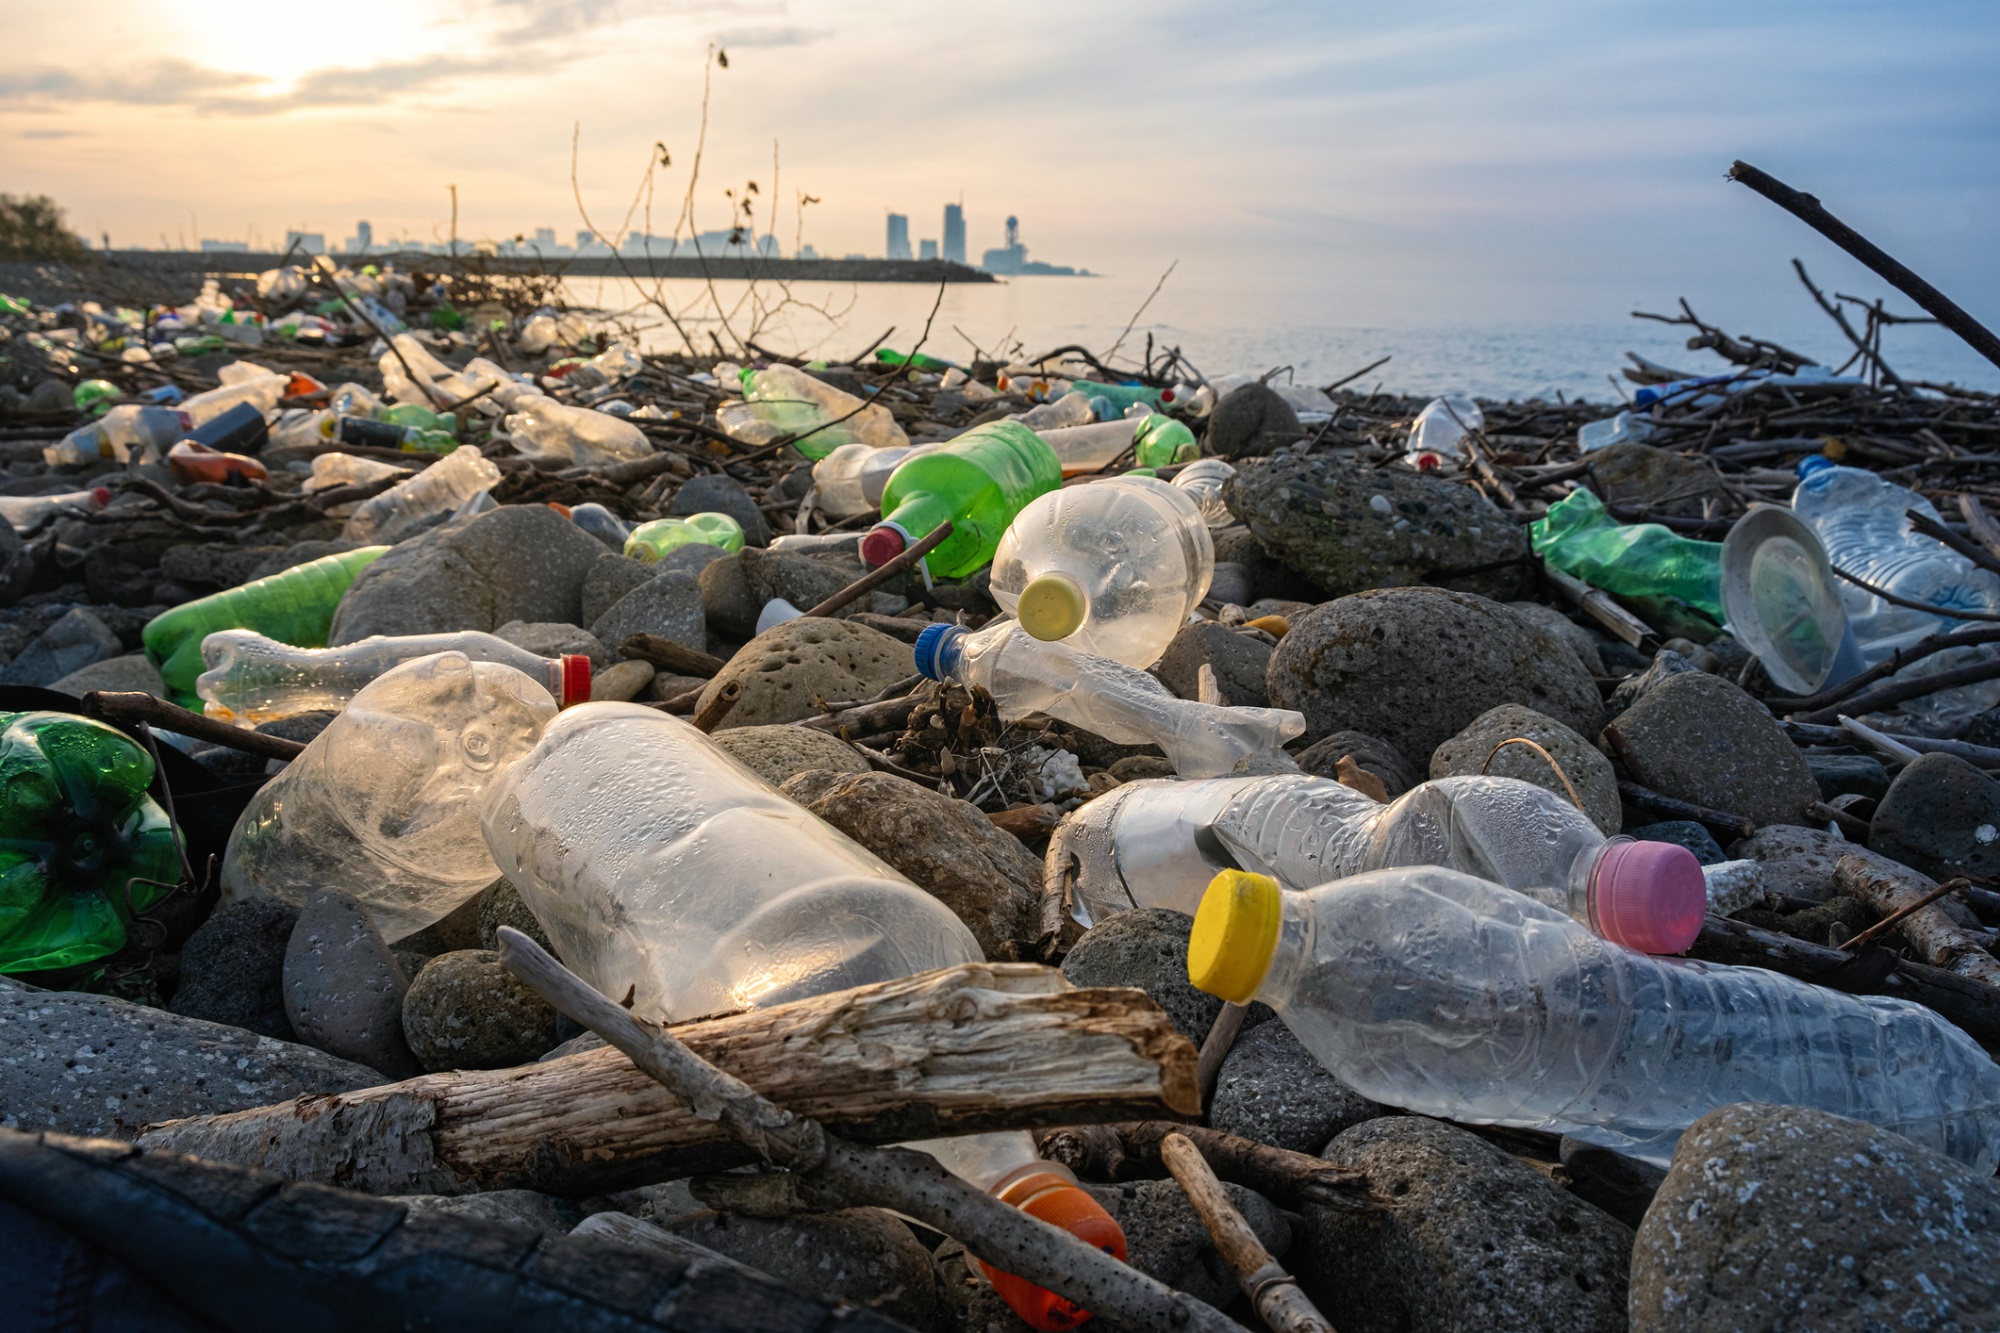 Results from UN INC 4 negotiations on a global plastics treaty